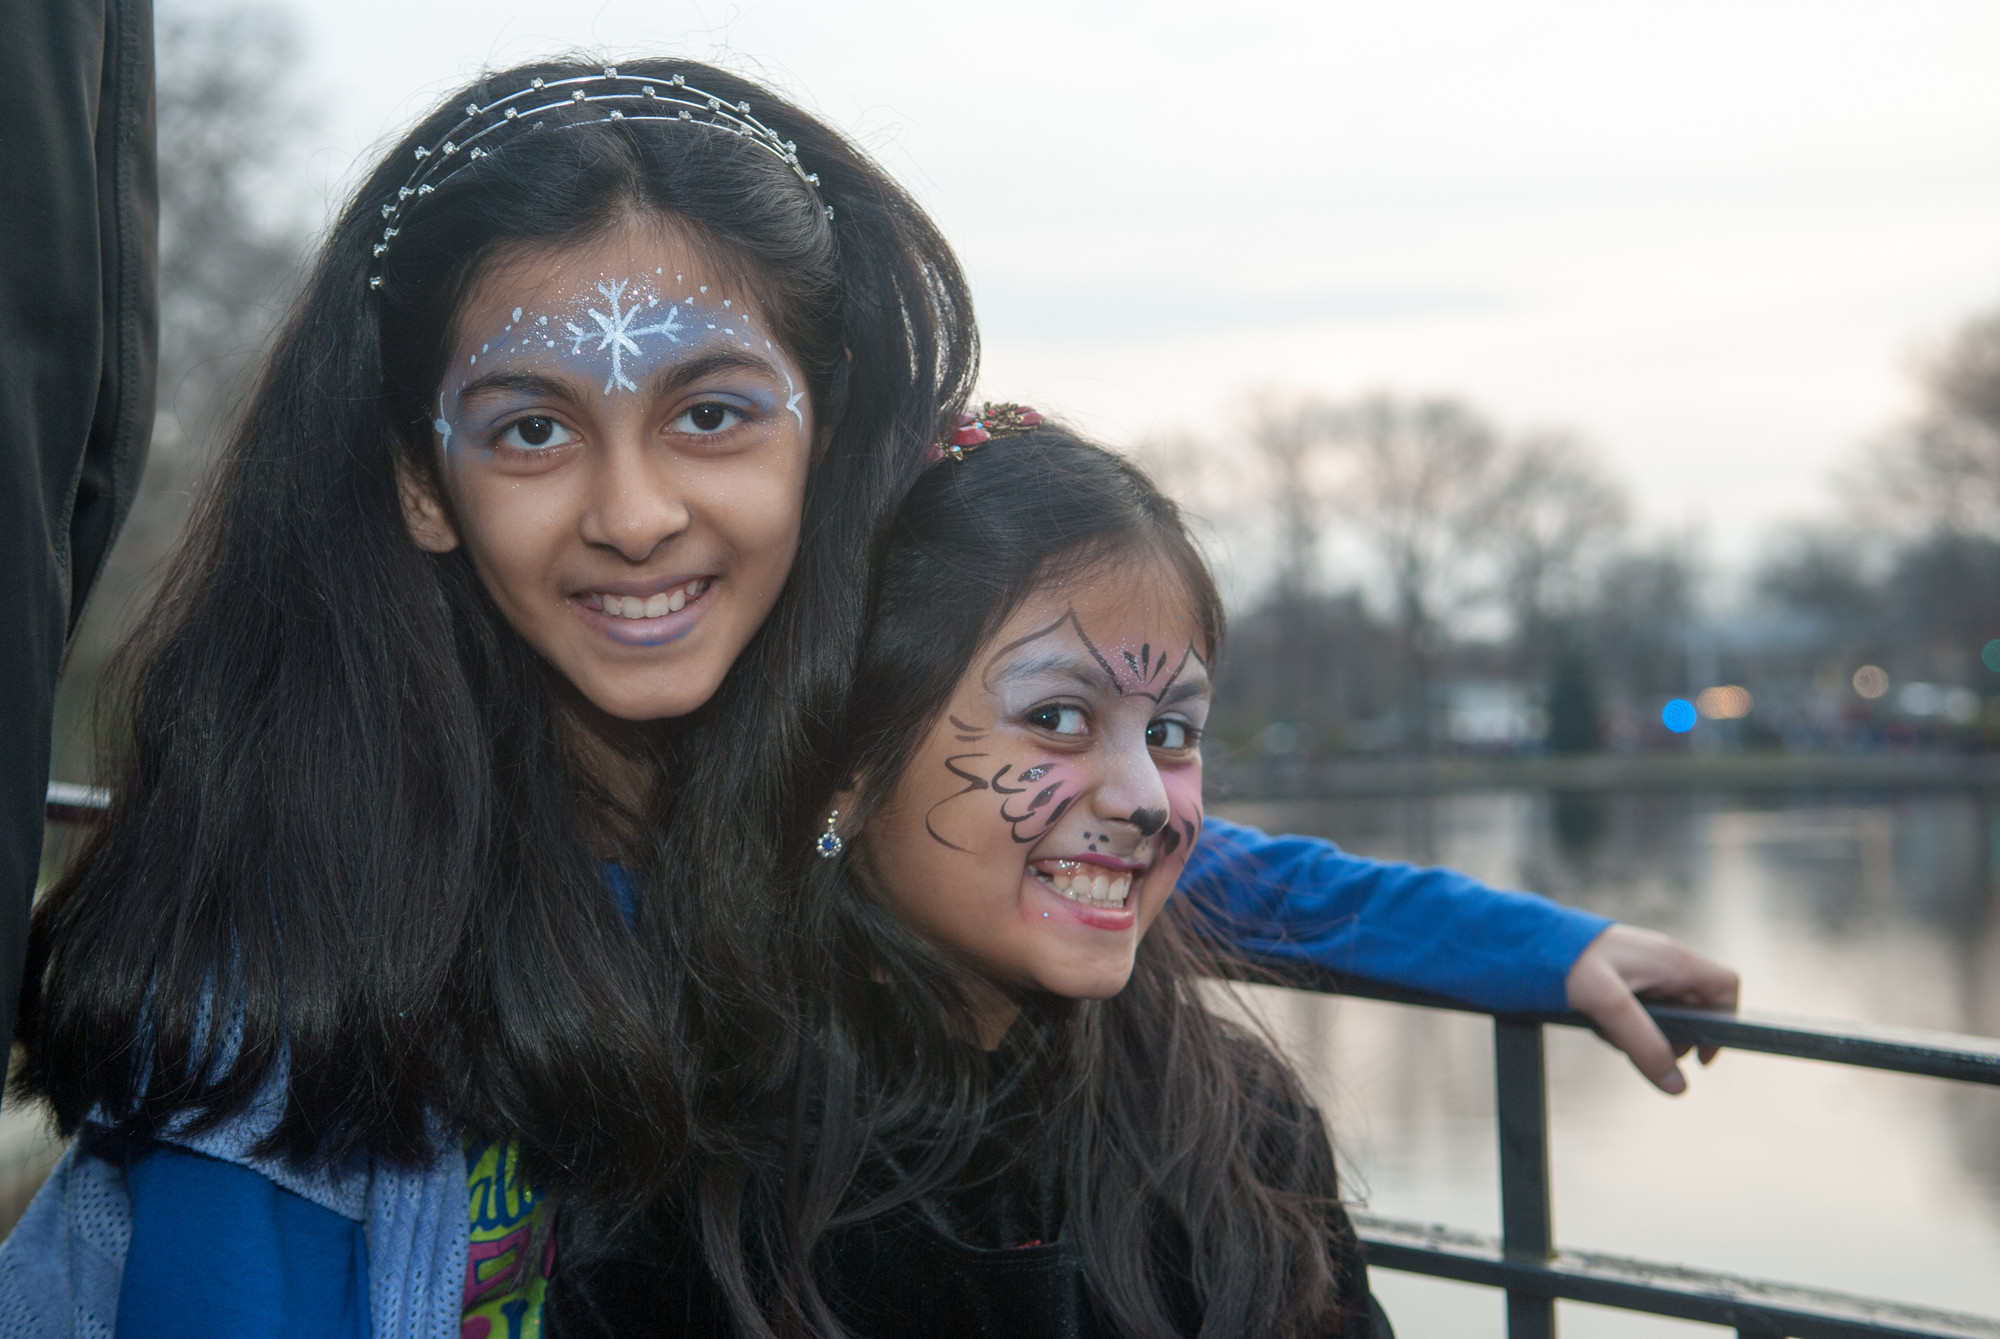 Sisters, Naveeha and Warishah, show off their face painting which they thought was "really good".